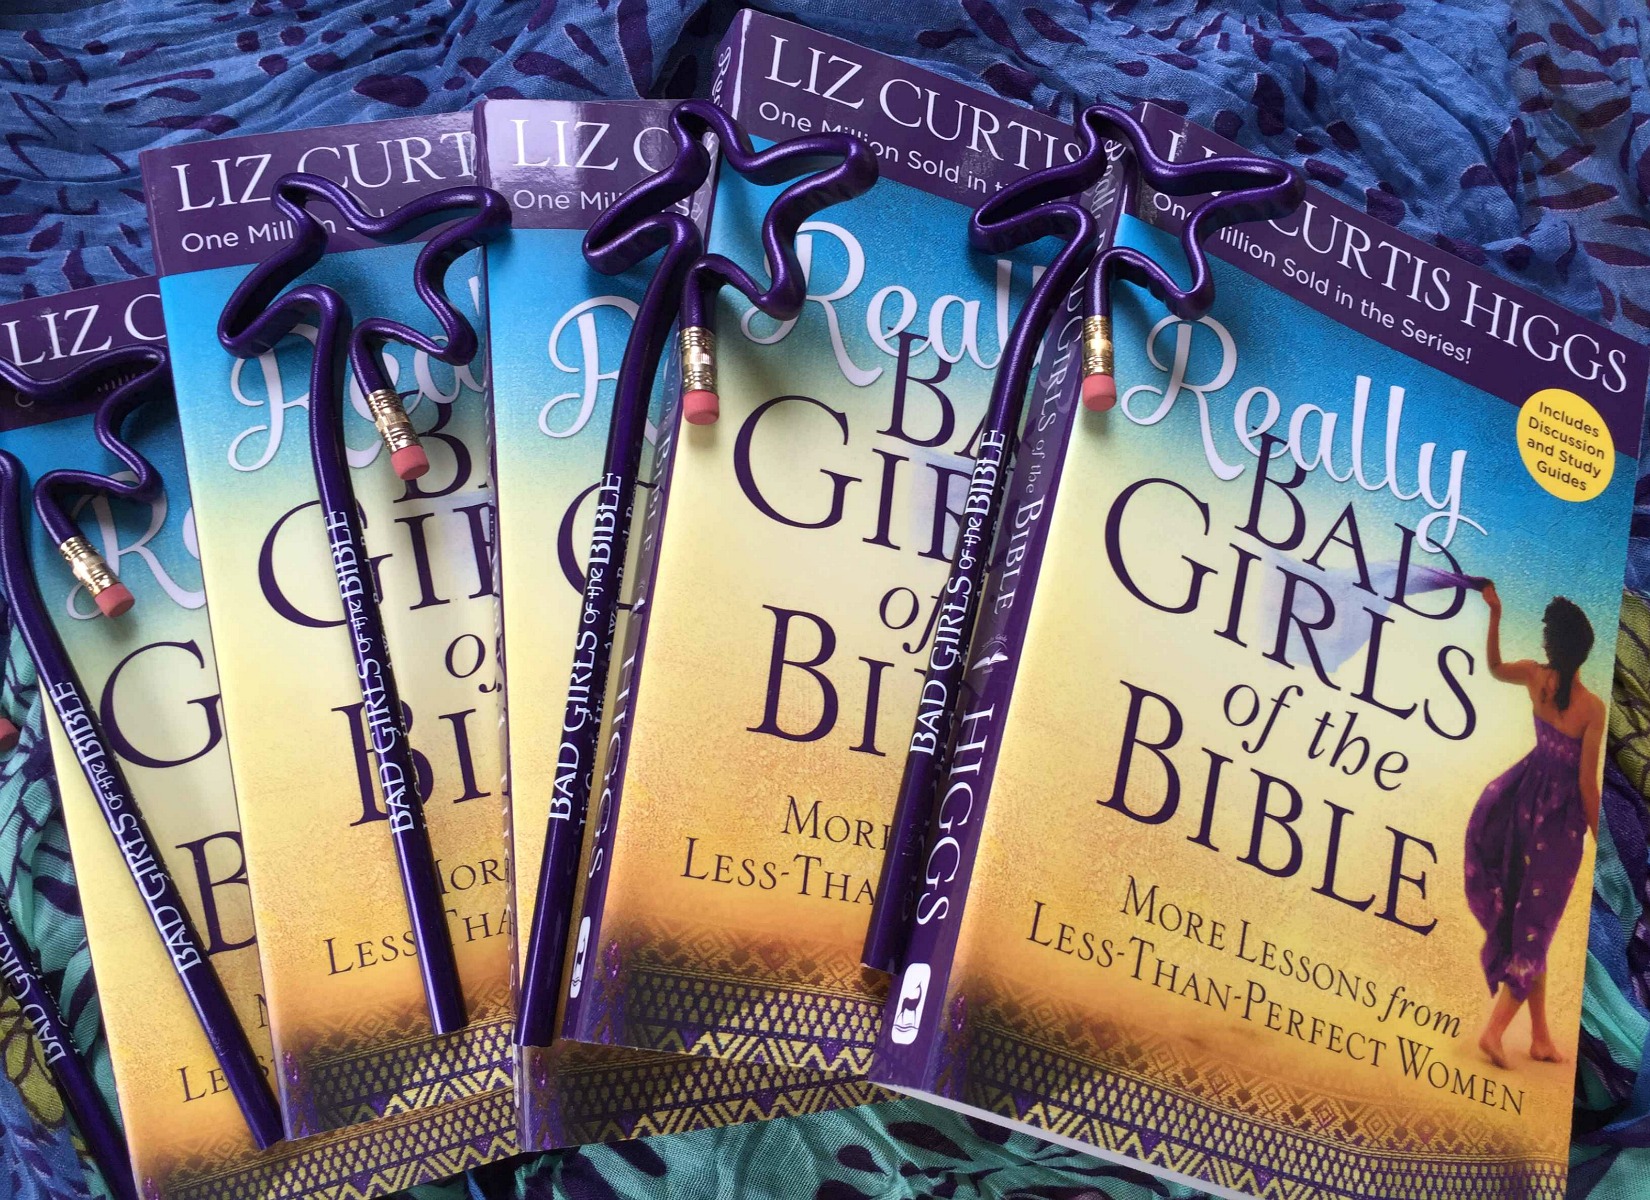 Really Bad Girls of the Bible - Liz Curtis Higgs